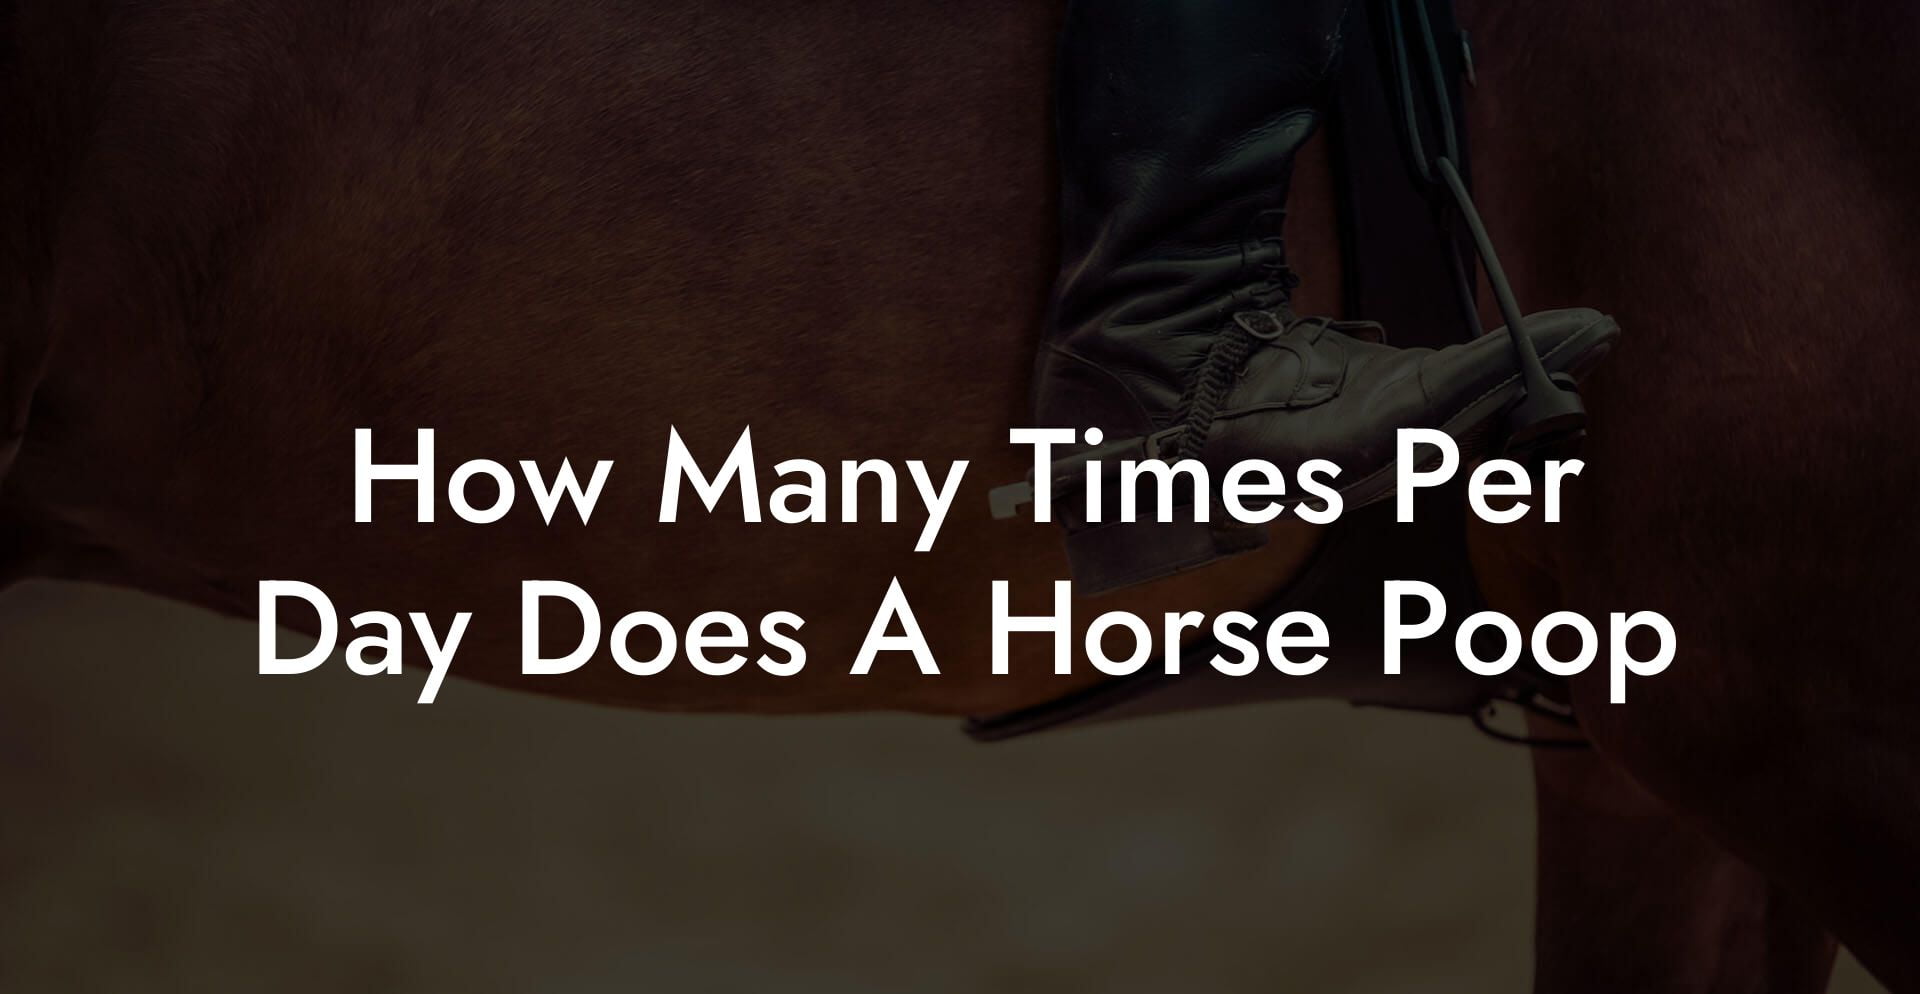 How Many Times Per Day Does A Horse Poop